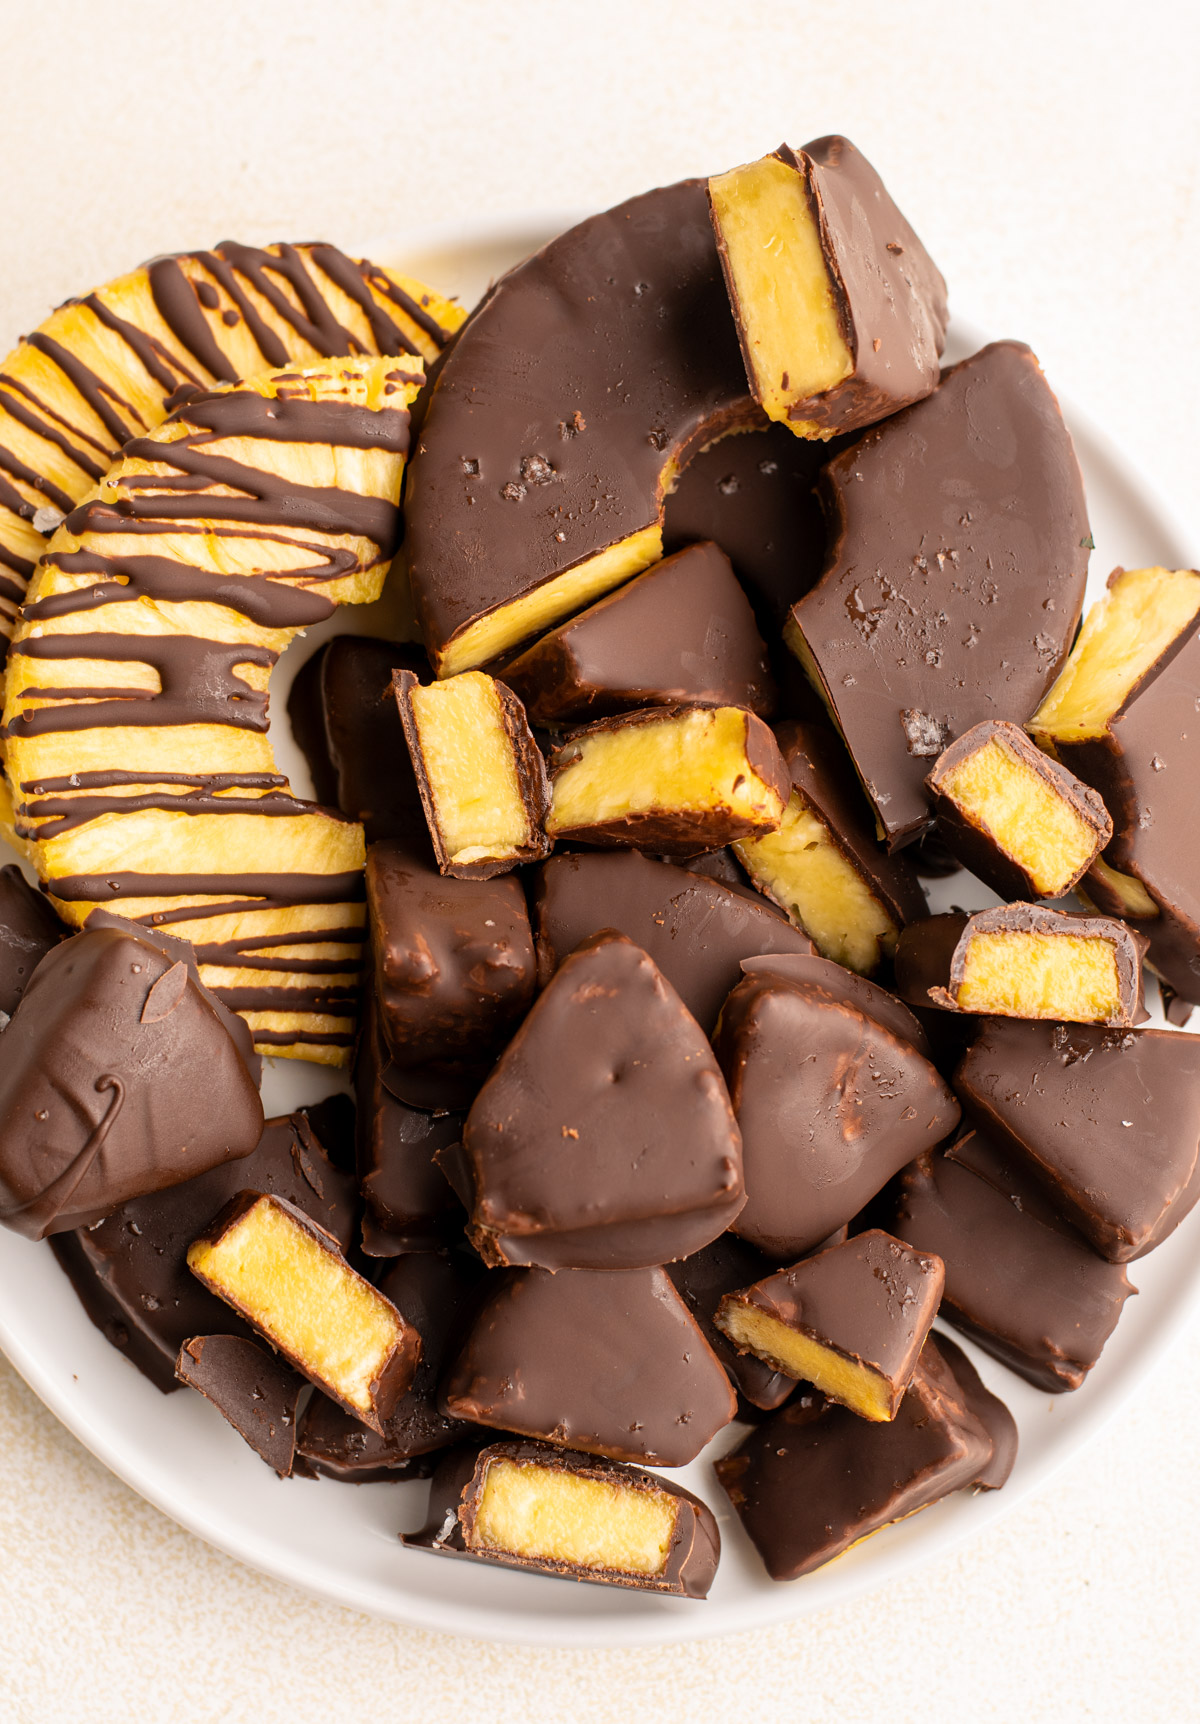 top view of chocolate covered pineapple pieces on a plate.